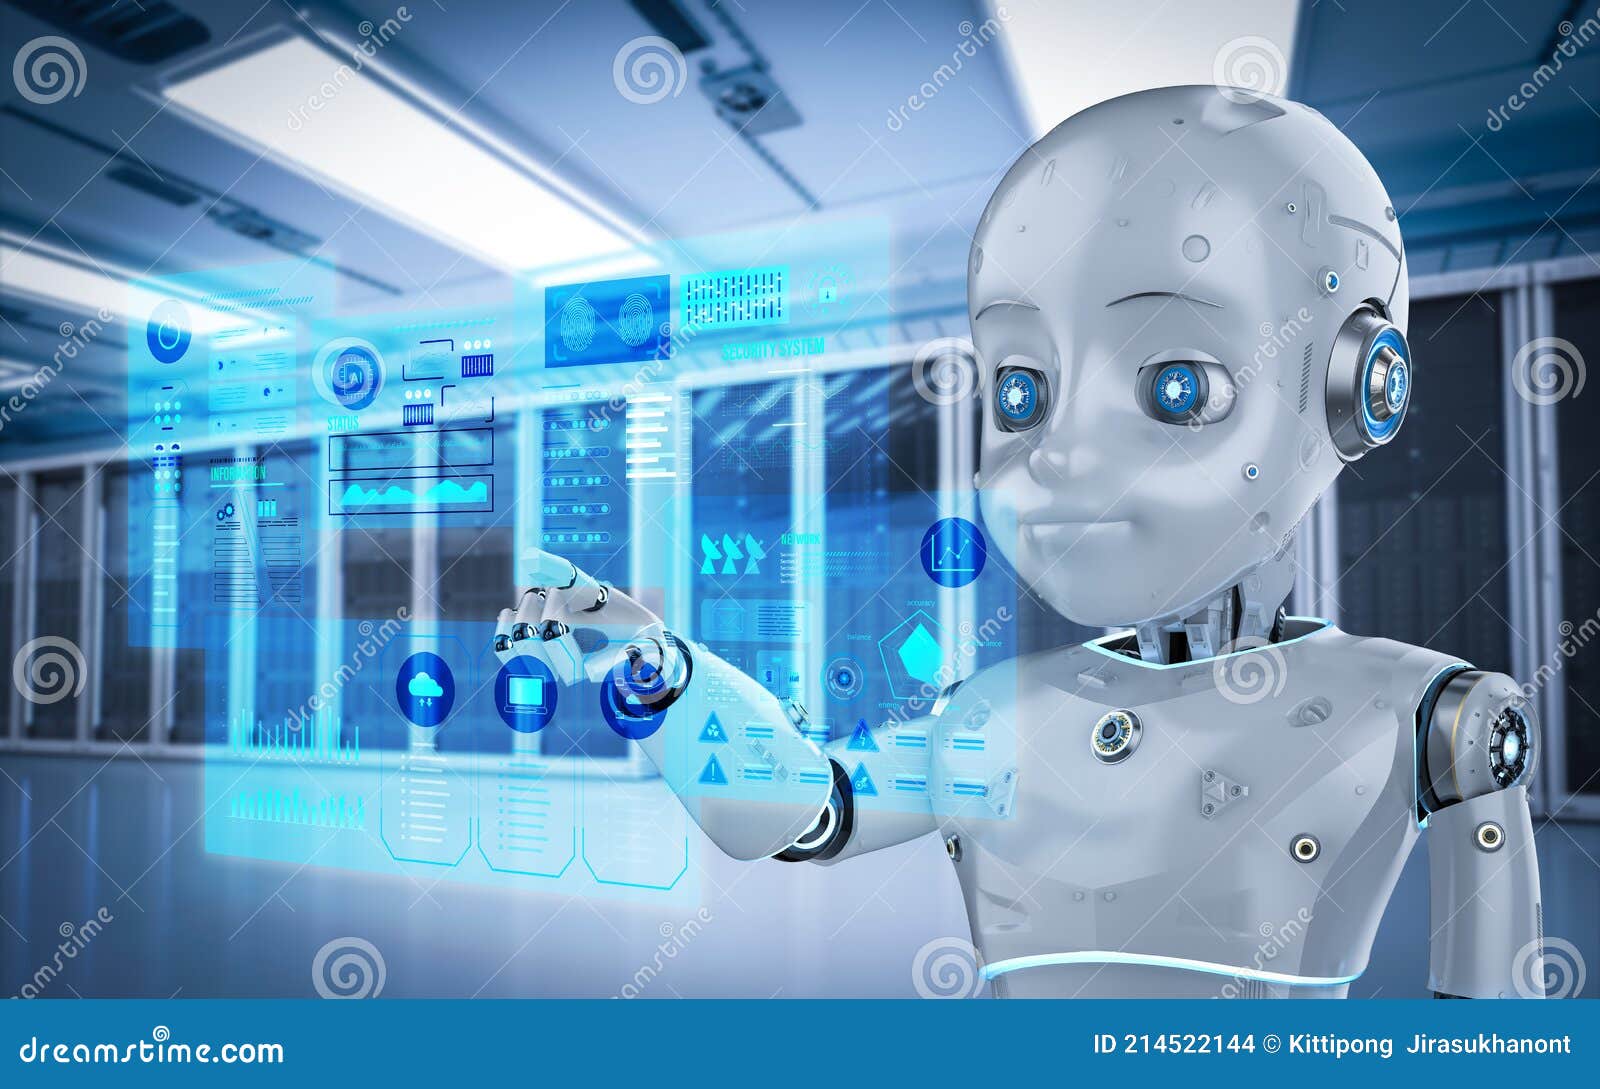 Cute Robot with Cartoon Character in Server Room Stock Illustration -  Illustration of cybernetic, cute: 214522144